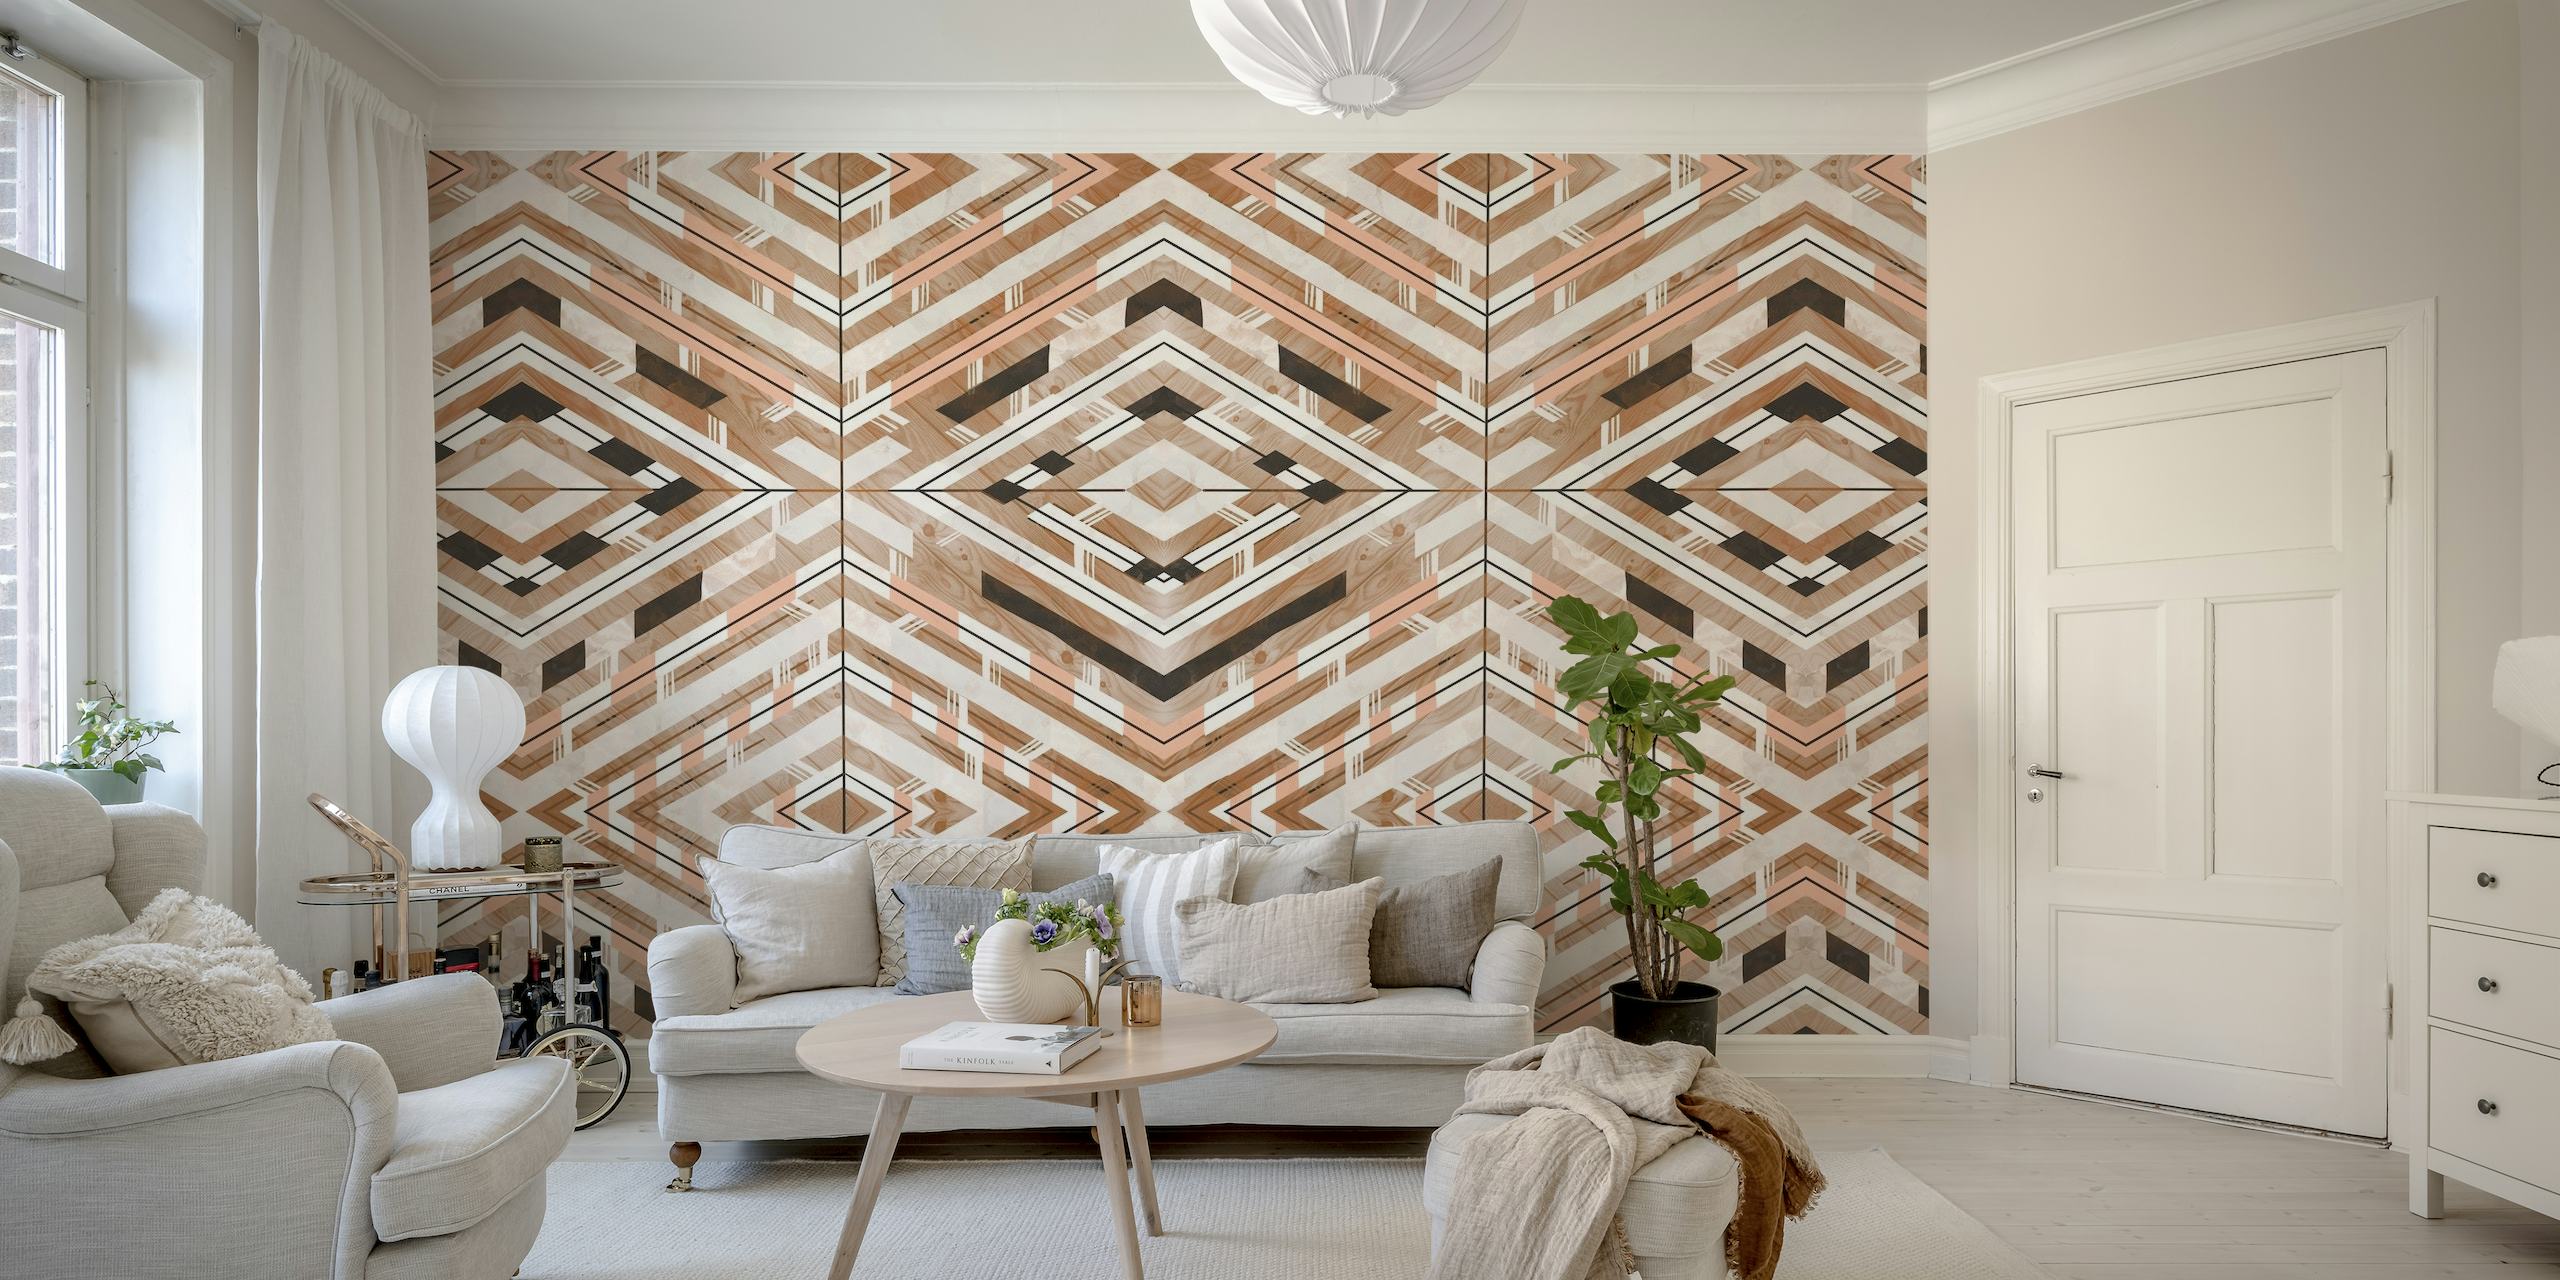 Southwestern Boho-style wall mural with linear geometric patterns